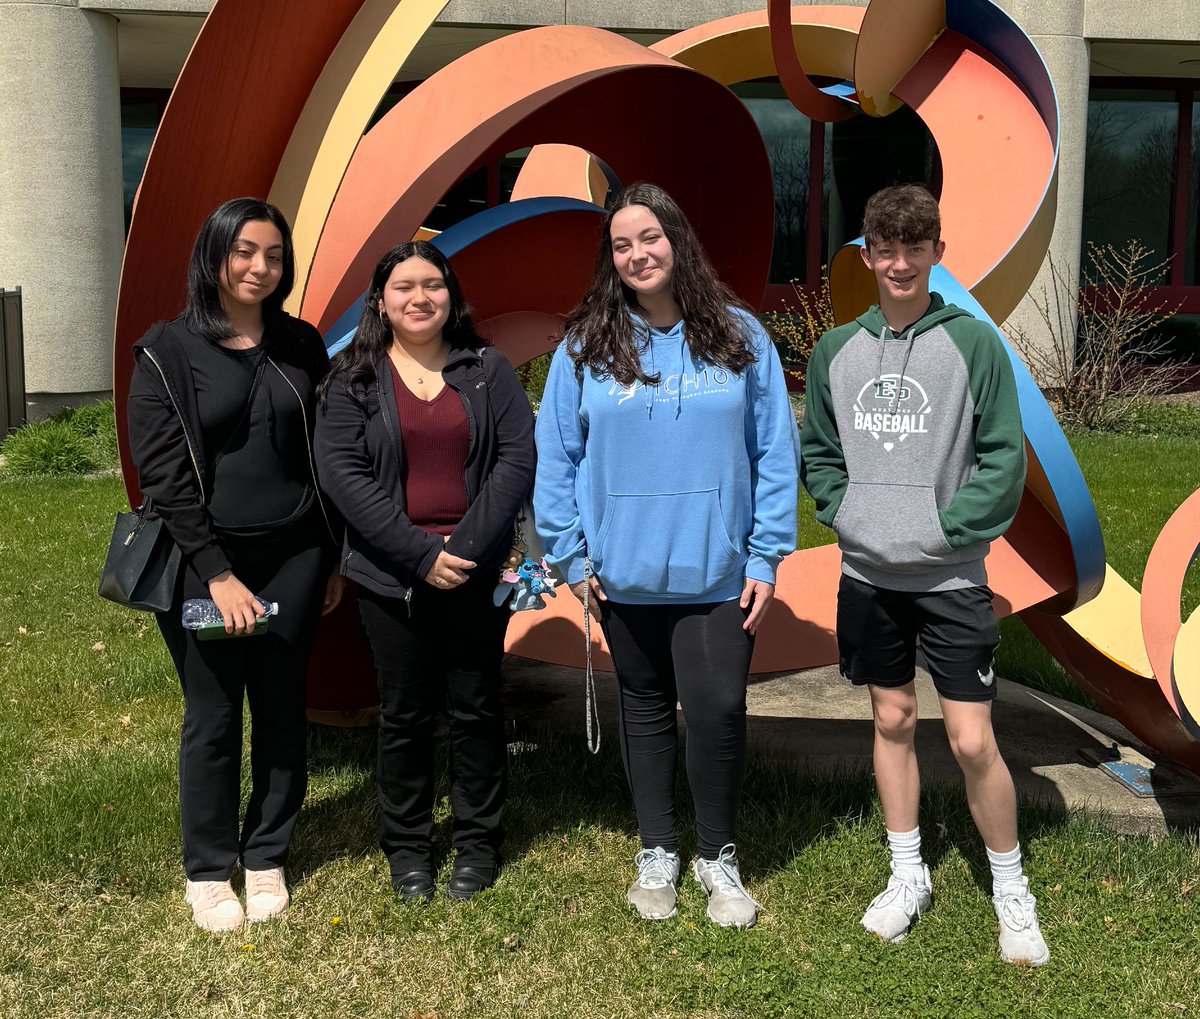 Cornelius Faulkner, Brianna Garcia, Mia Gonzalez and Julia O'Hare competed in the Moraine Valley Community College Tech Challenge for Microsoft Office last week. They were selected to participate by Mr. Pierce, their Computer Concepts and Literacy teacher.